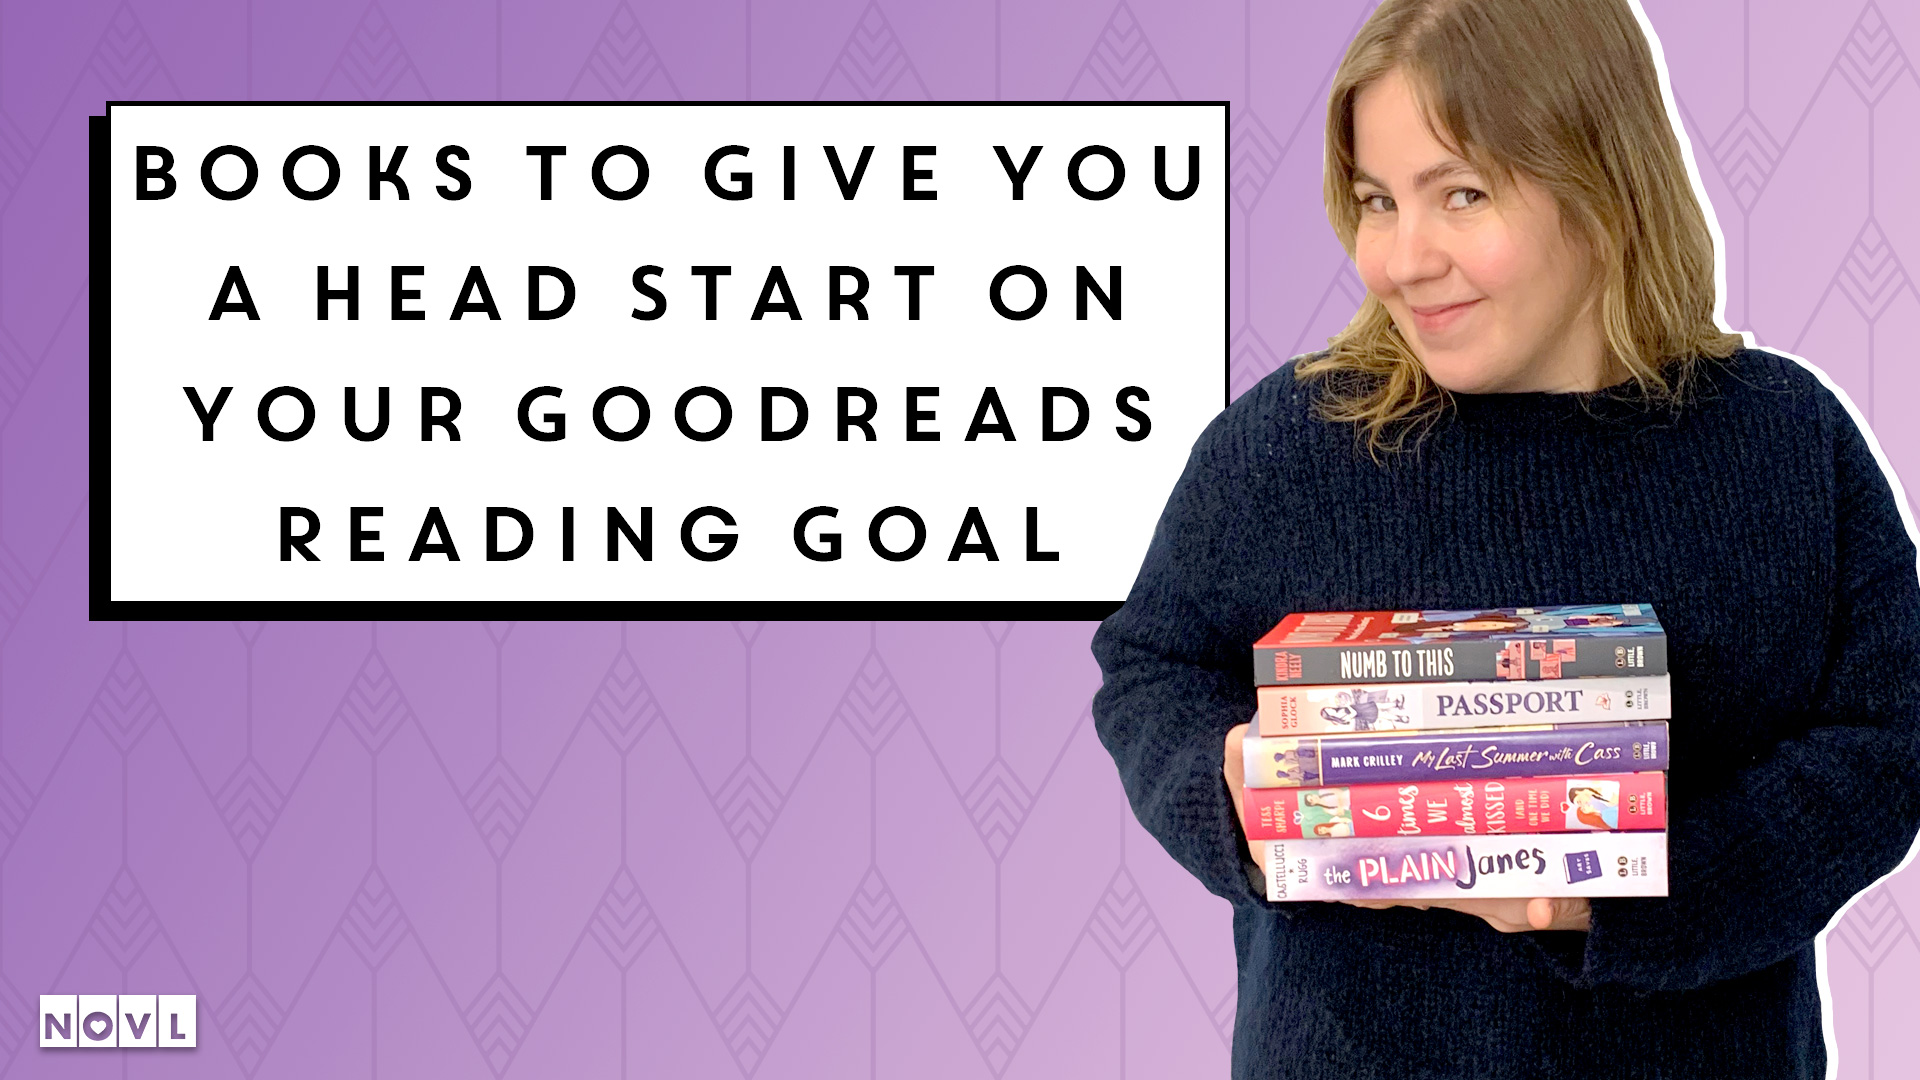 The NOVL Blog, Featured Image for Article: Books to Give You a Head Start on Your Goodreads Reading Goal